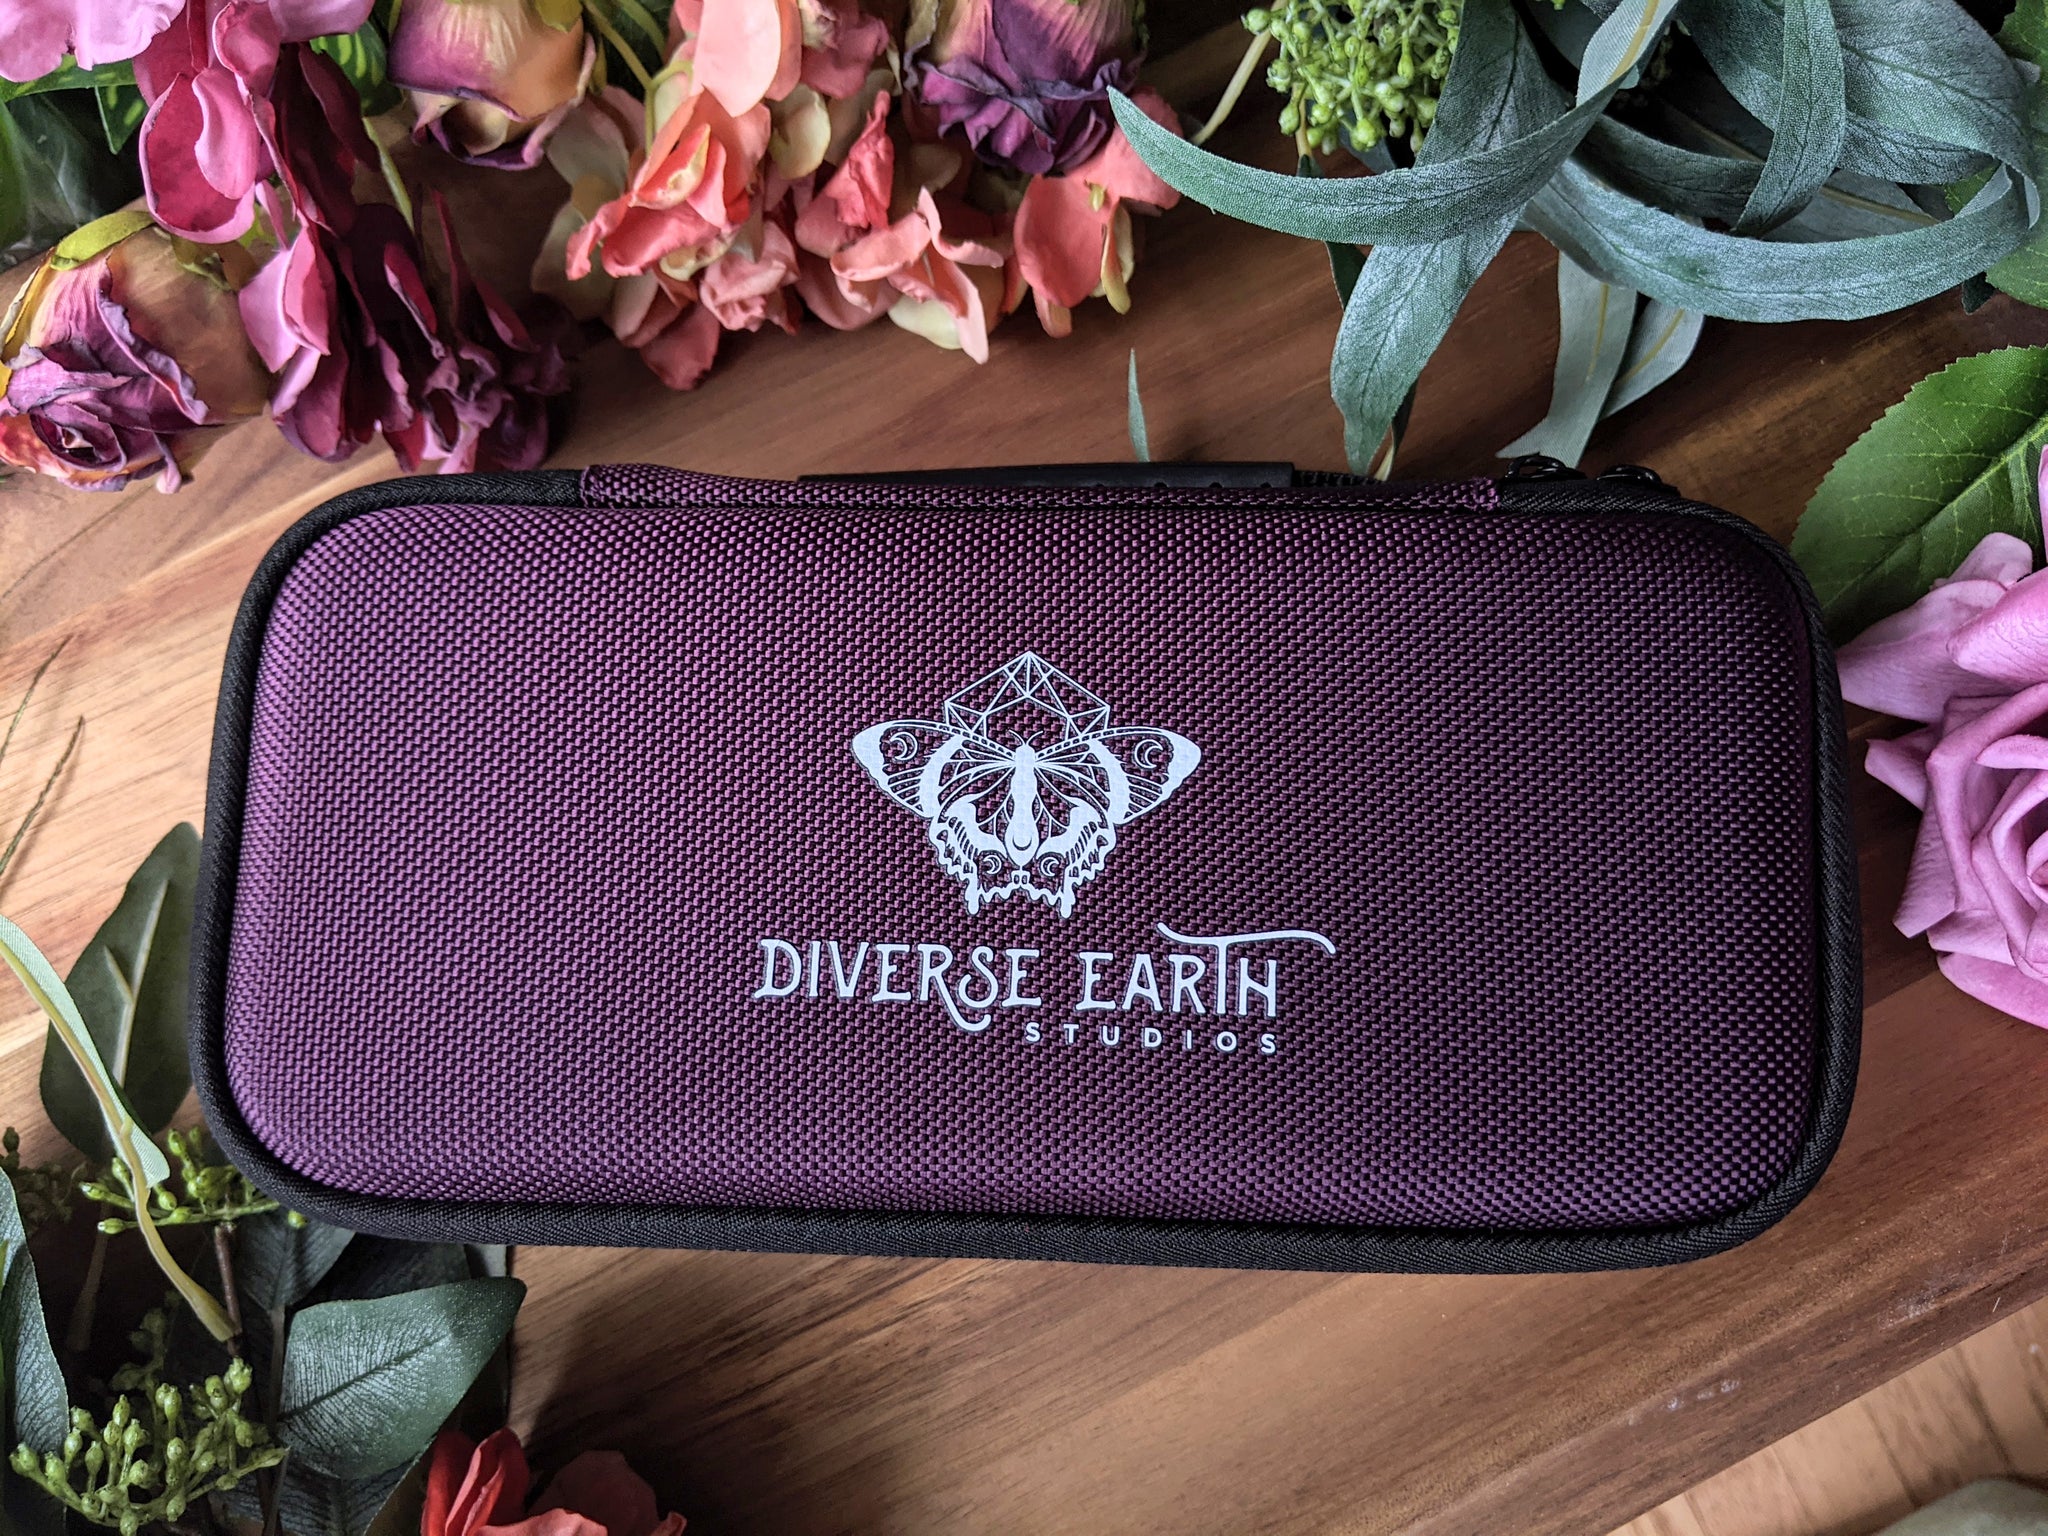 Smoking Accessories Carry Case